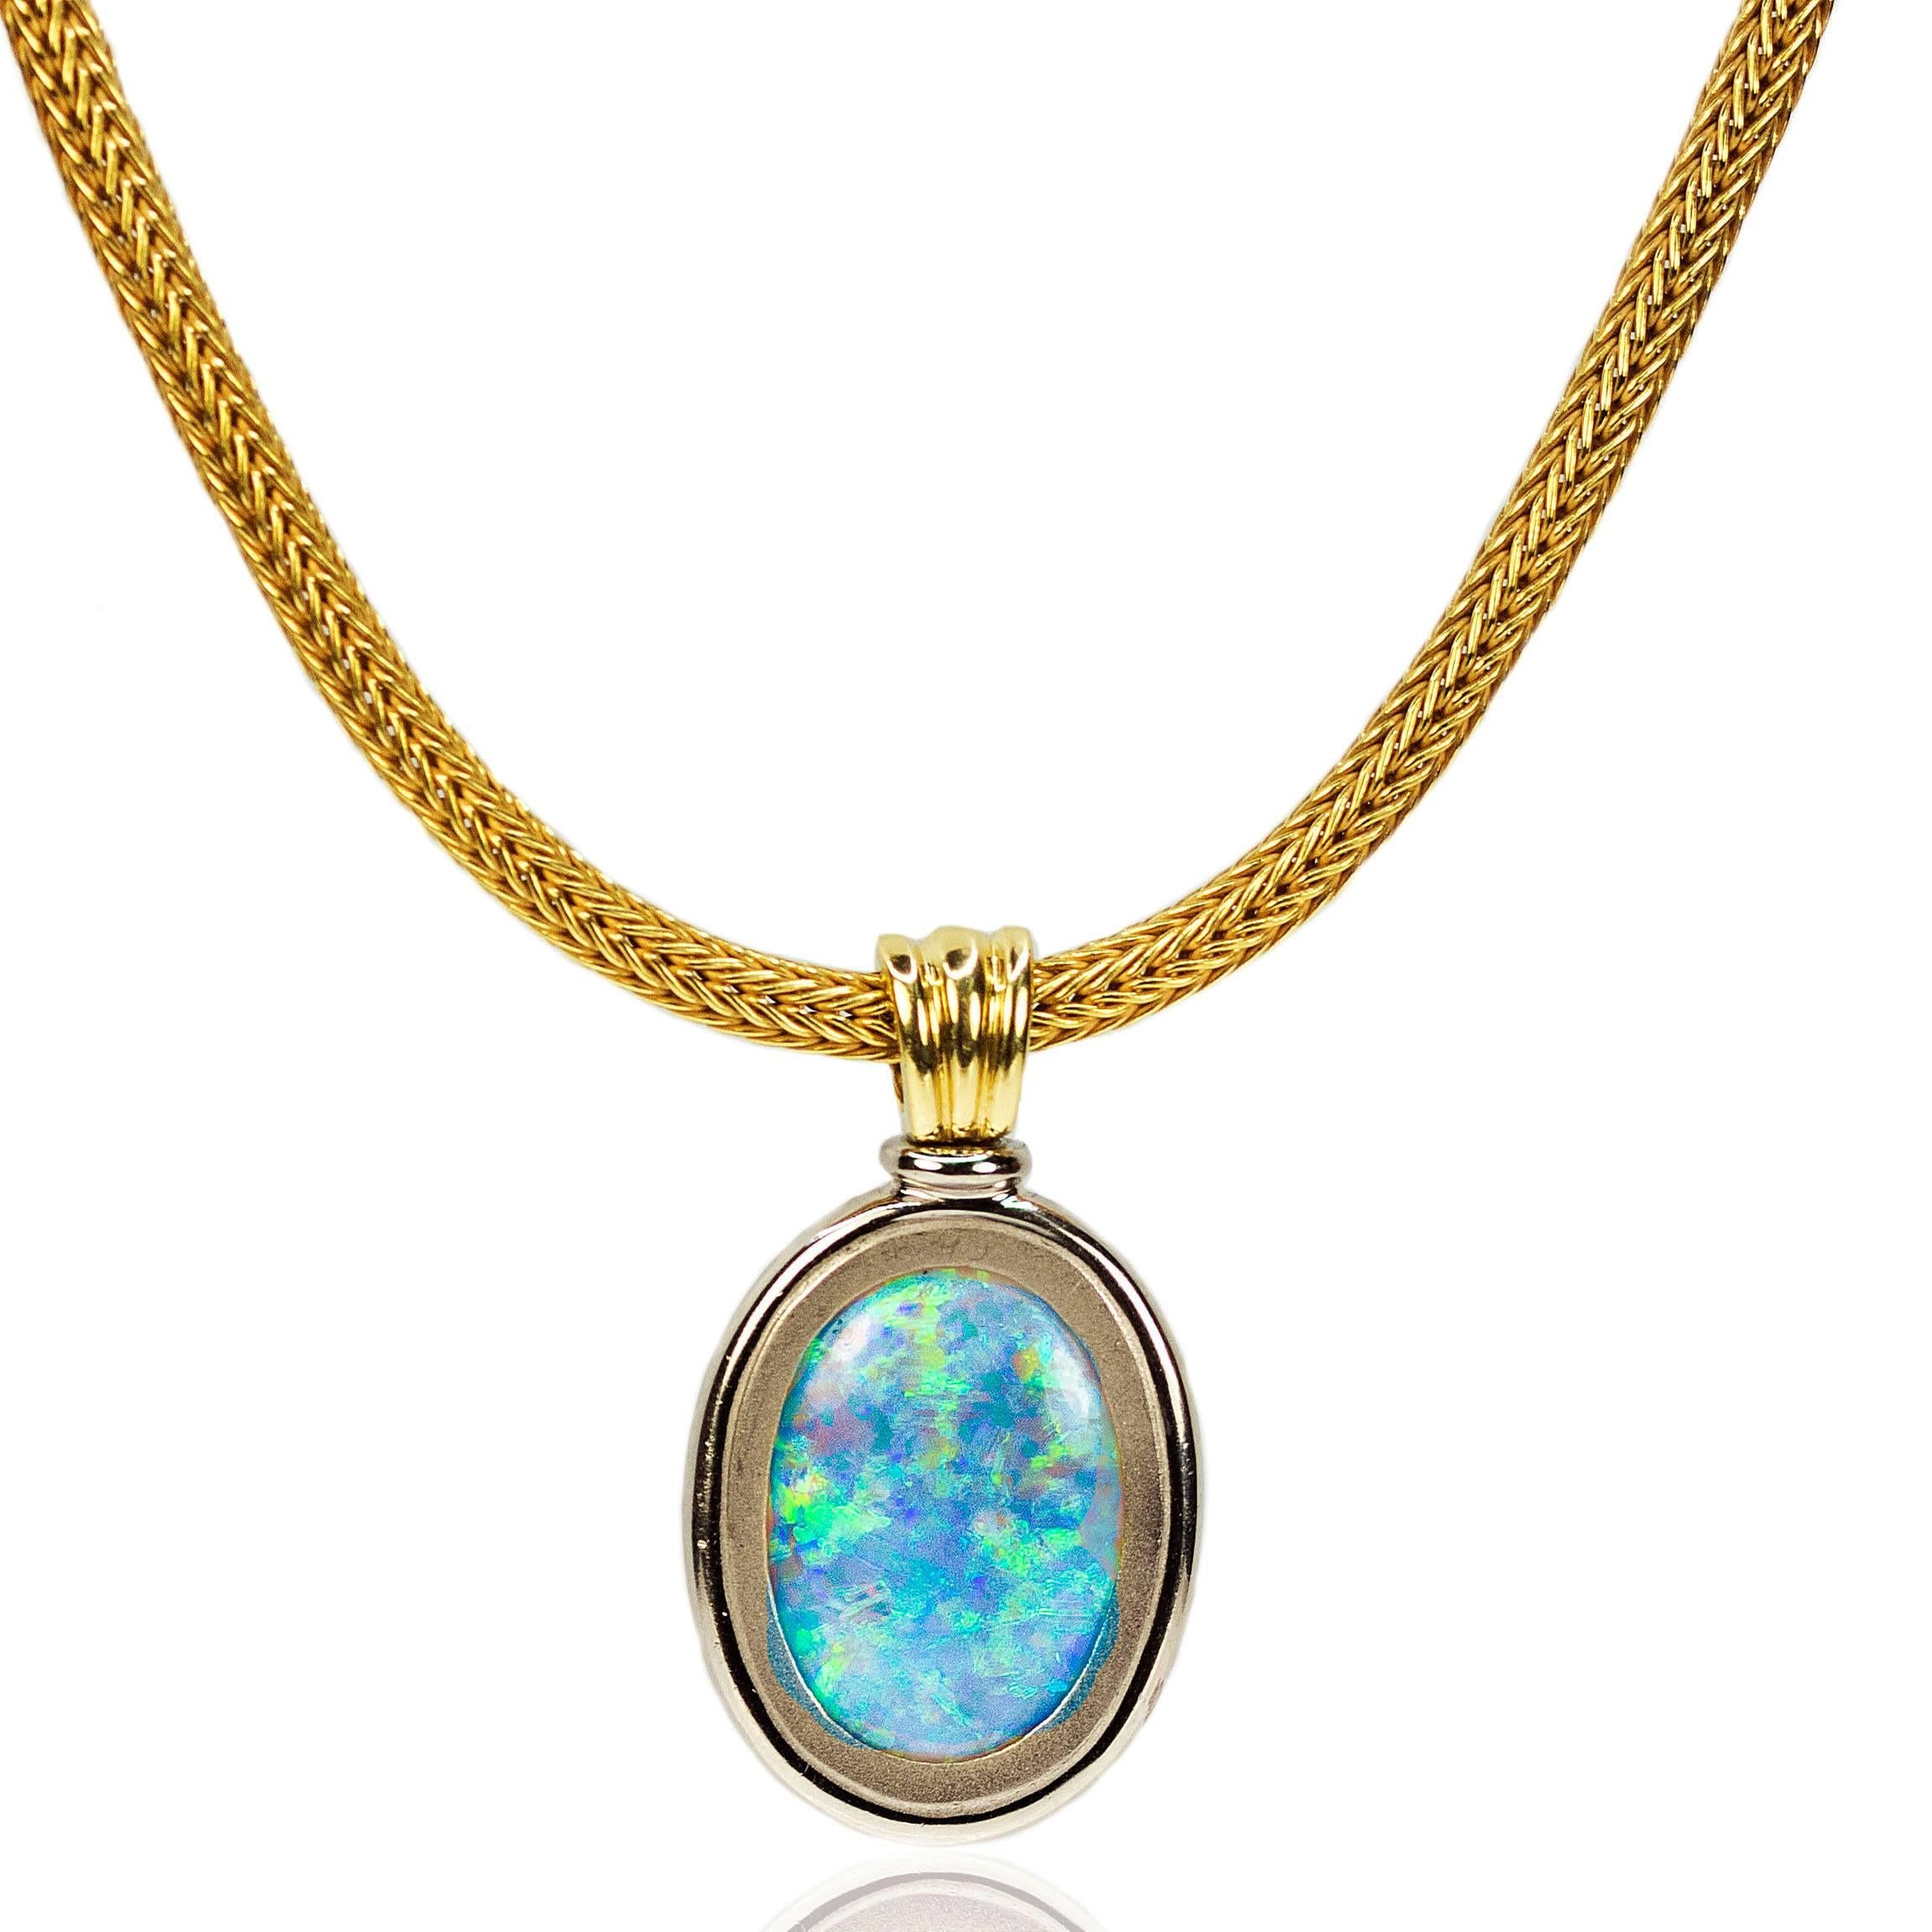 Magnificent Necklace with reversible double sided Australian Opal weighing approximately 15 carats and displaying gorgeous blue, green and red flashes of color. Set in 18k and floating on a thick 18k mesh chain. 61.42 grams.